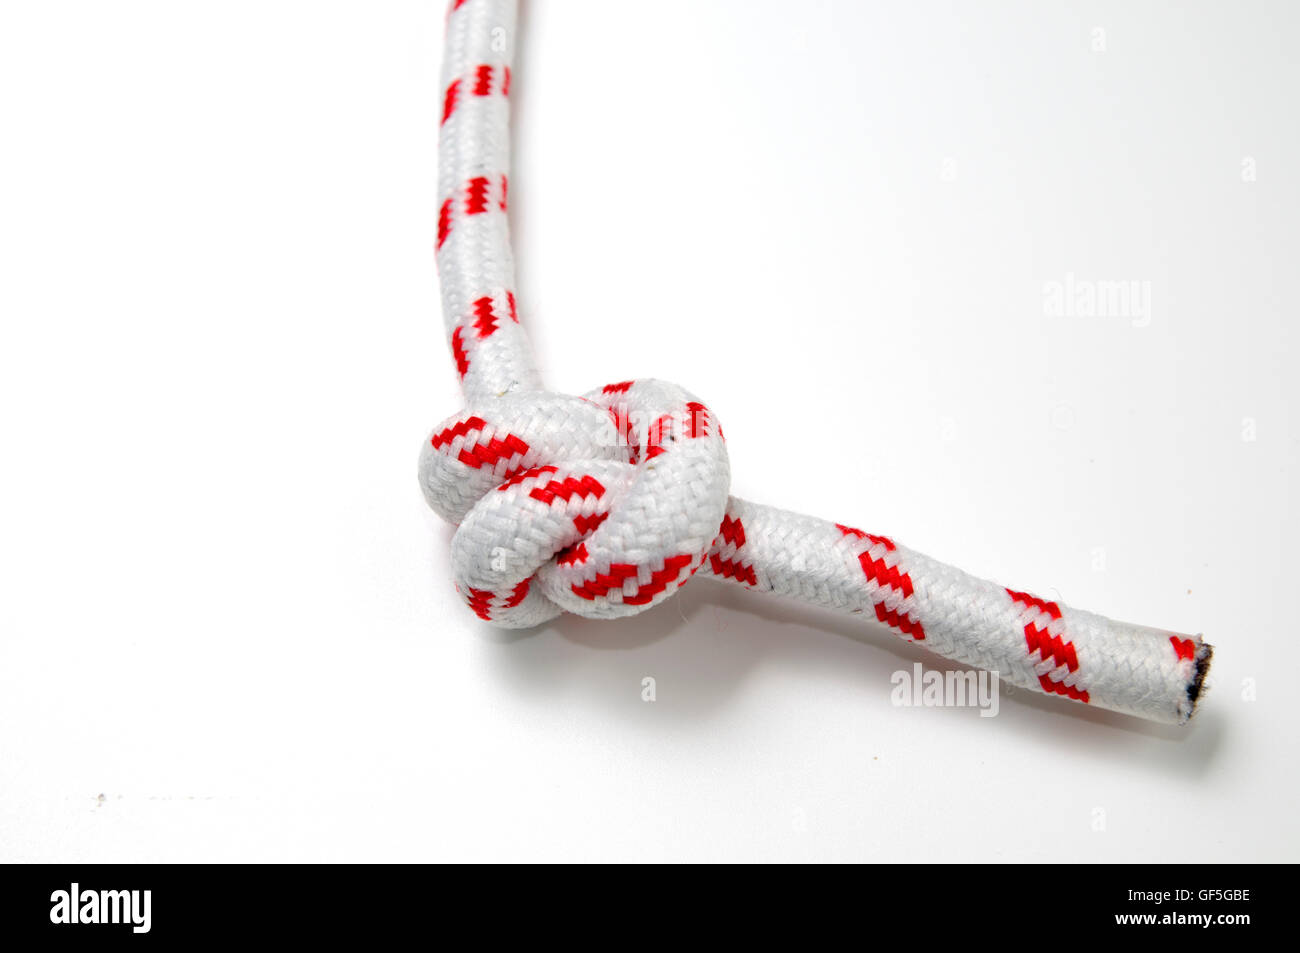 Double overhand knot AKA double granny knot on white background Stock Photo